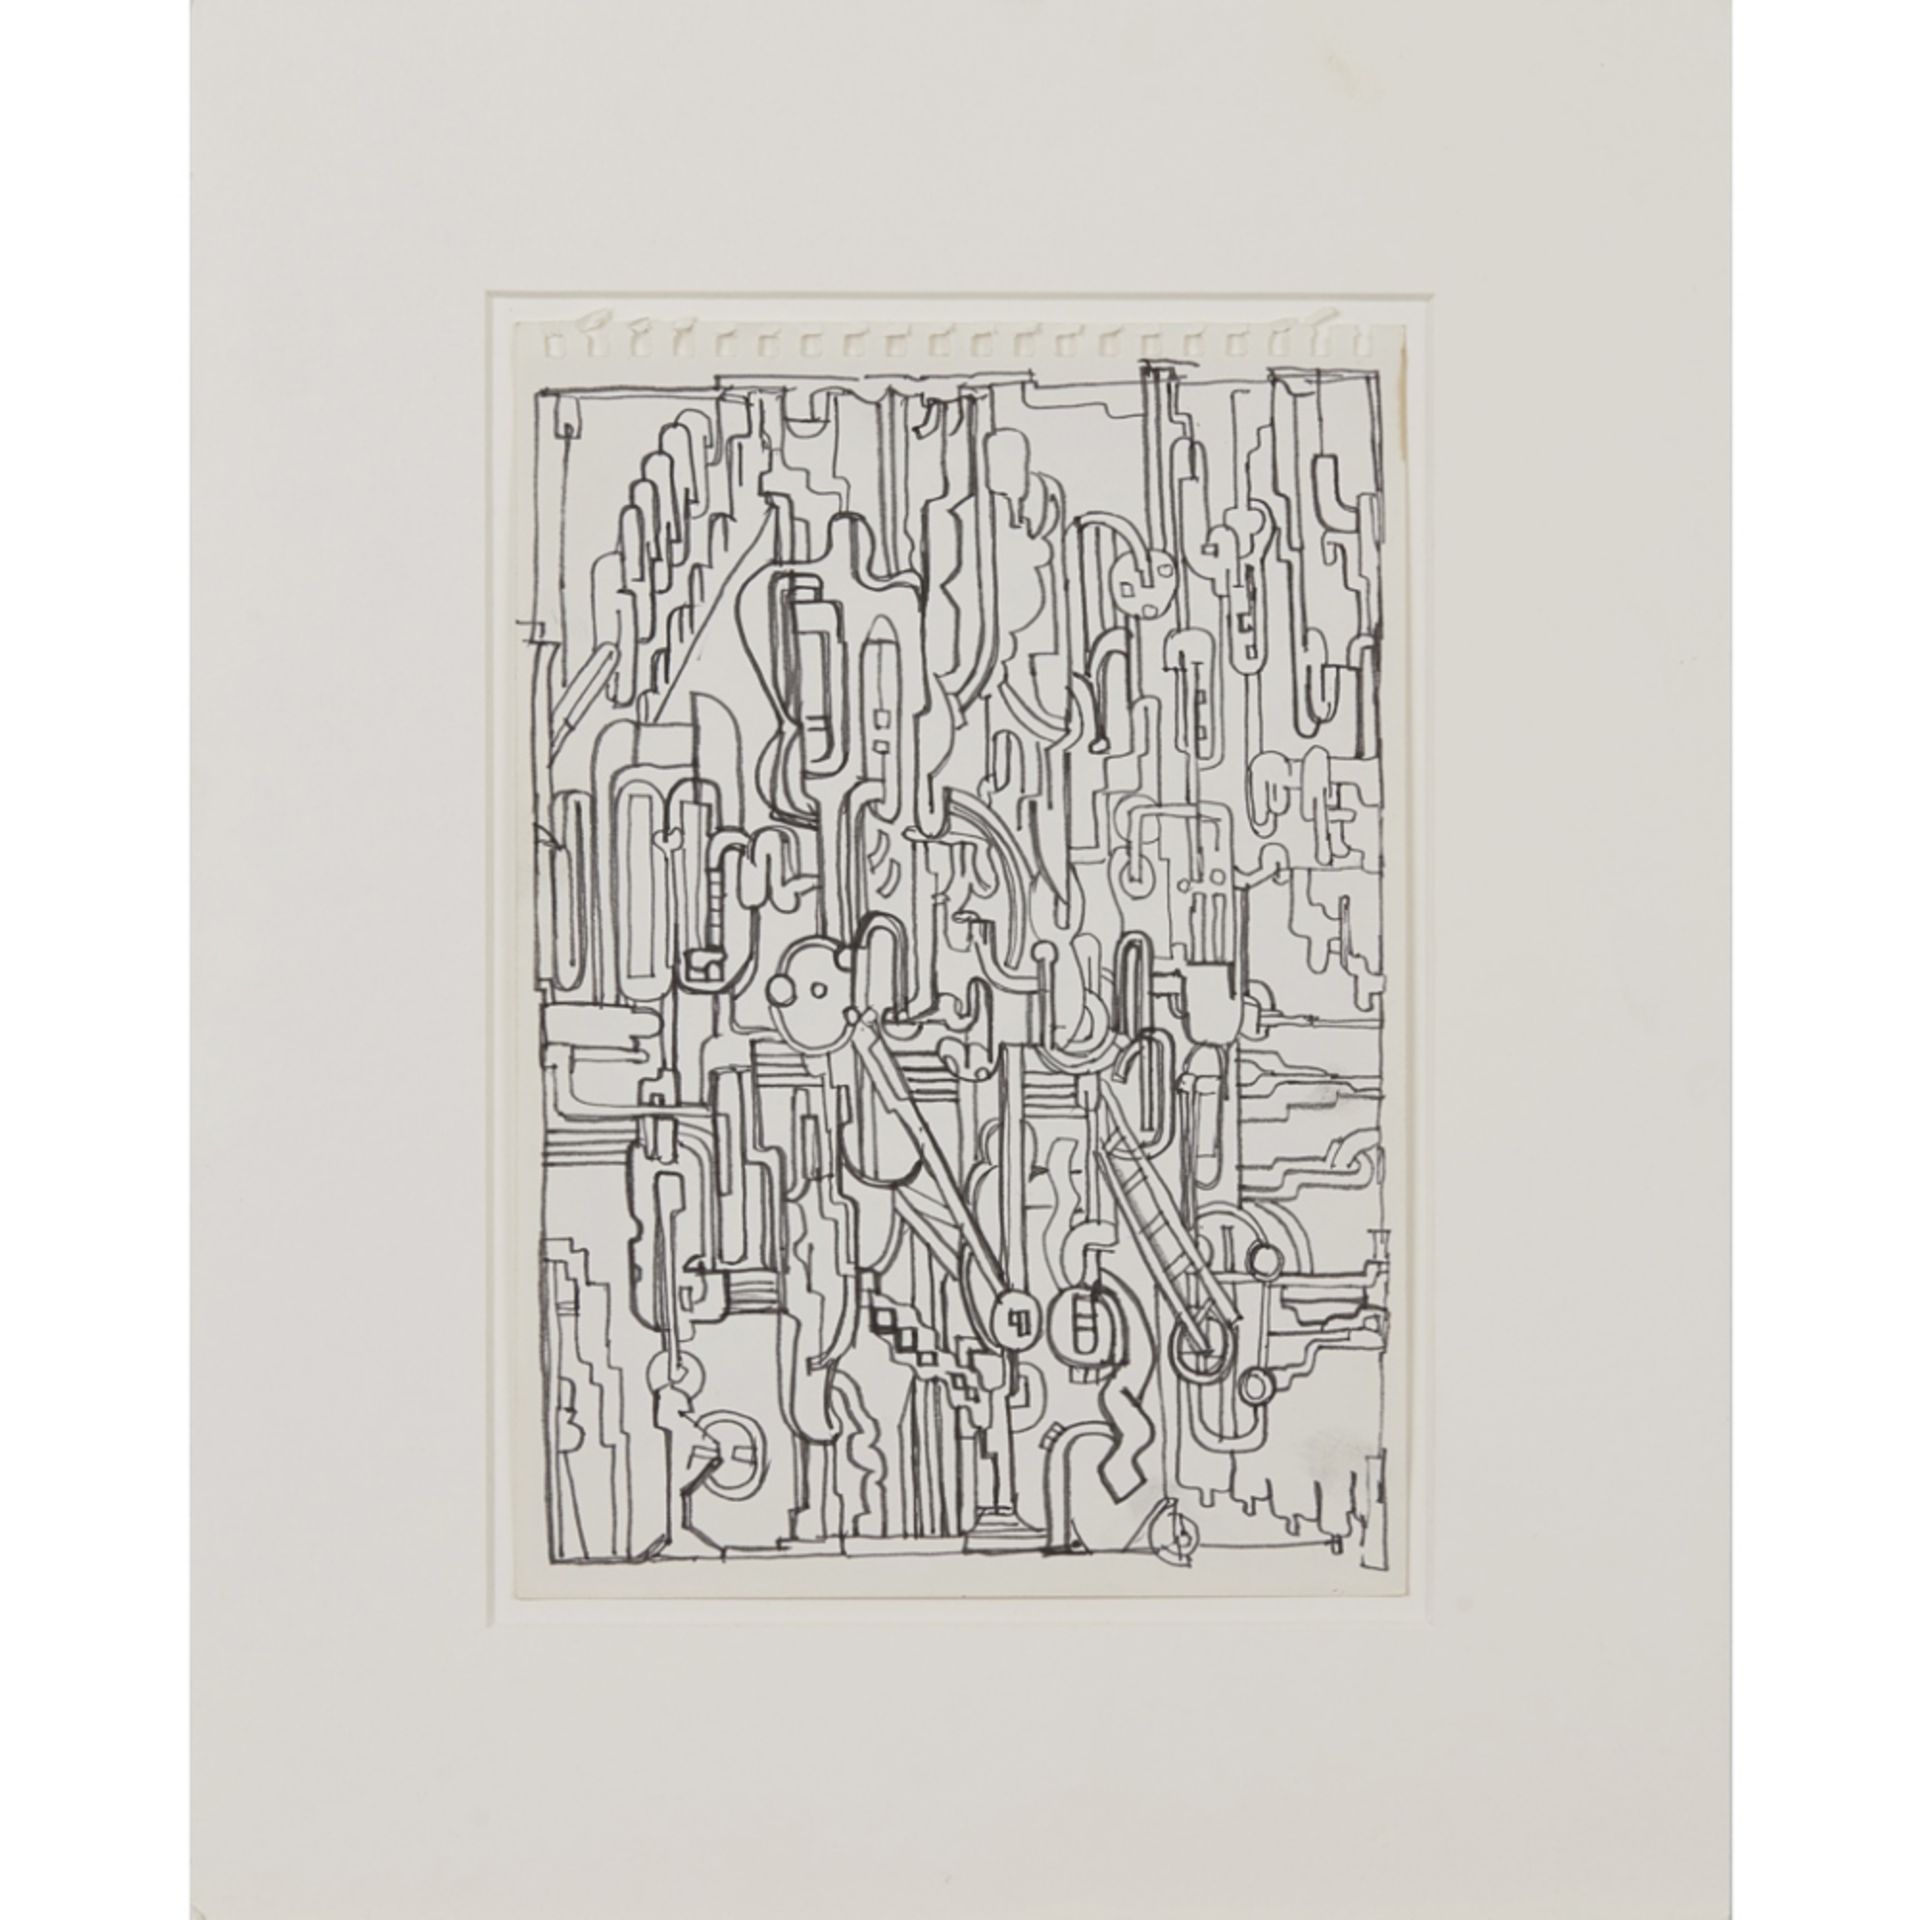 [§] SIR EDUARDO PAOLOZZI K.B.E., R.A., H.R.S.A. (SCOTTISH 1924-2005)FROM THE ARTIST'S SKETCHBOOK - Image 2 of 2